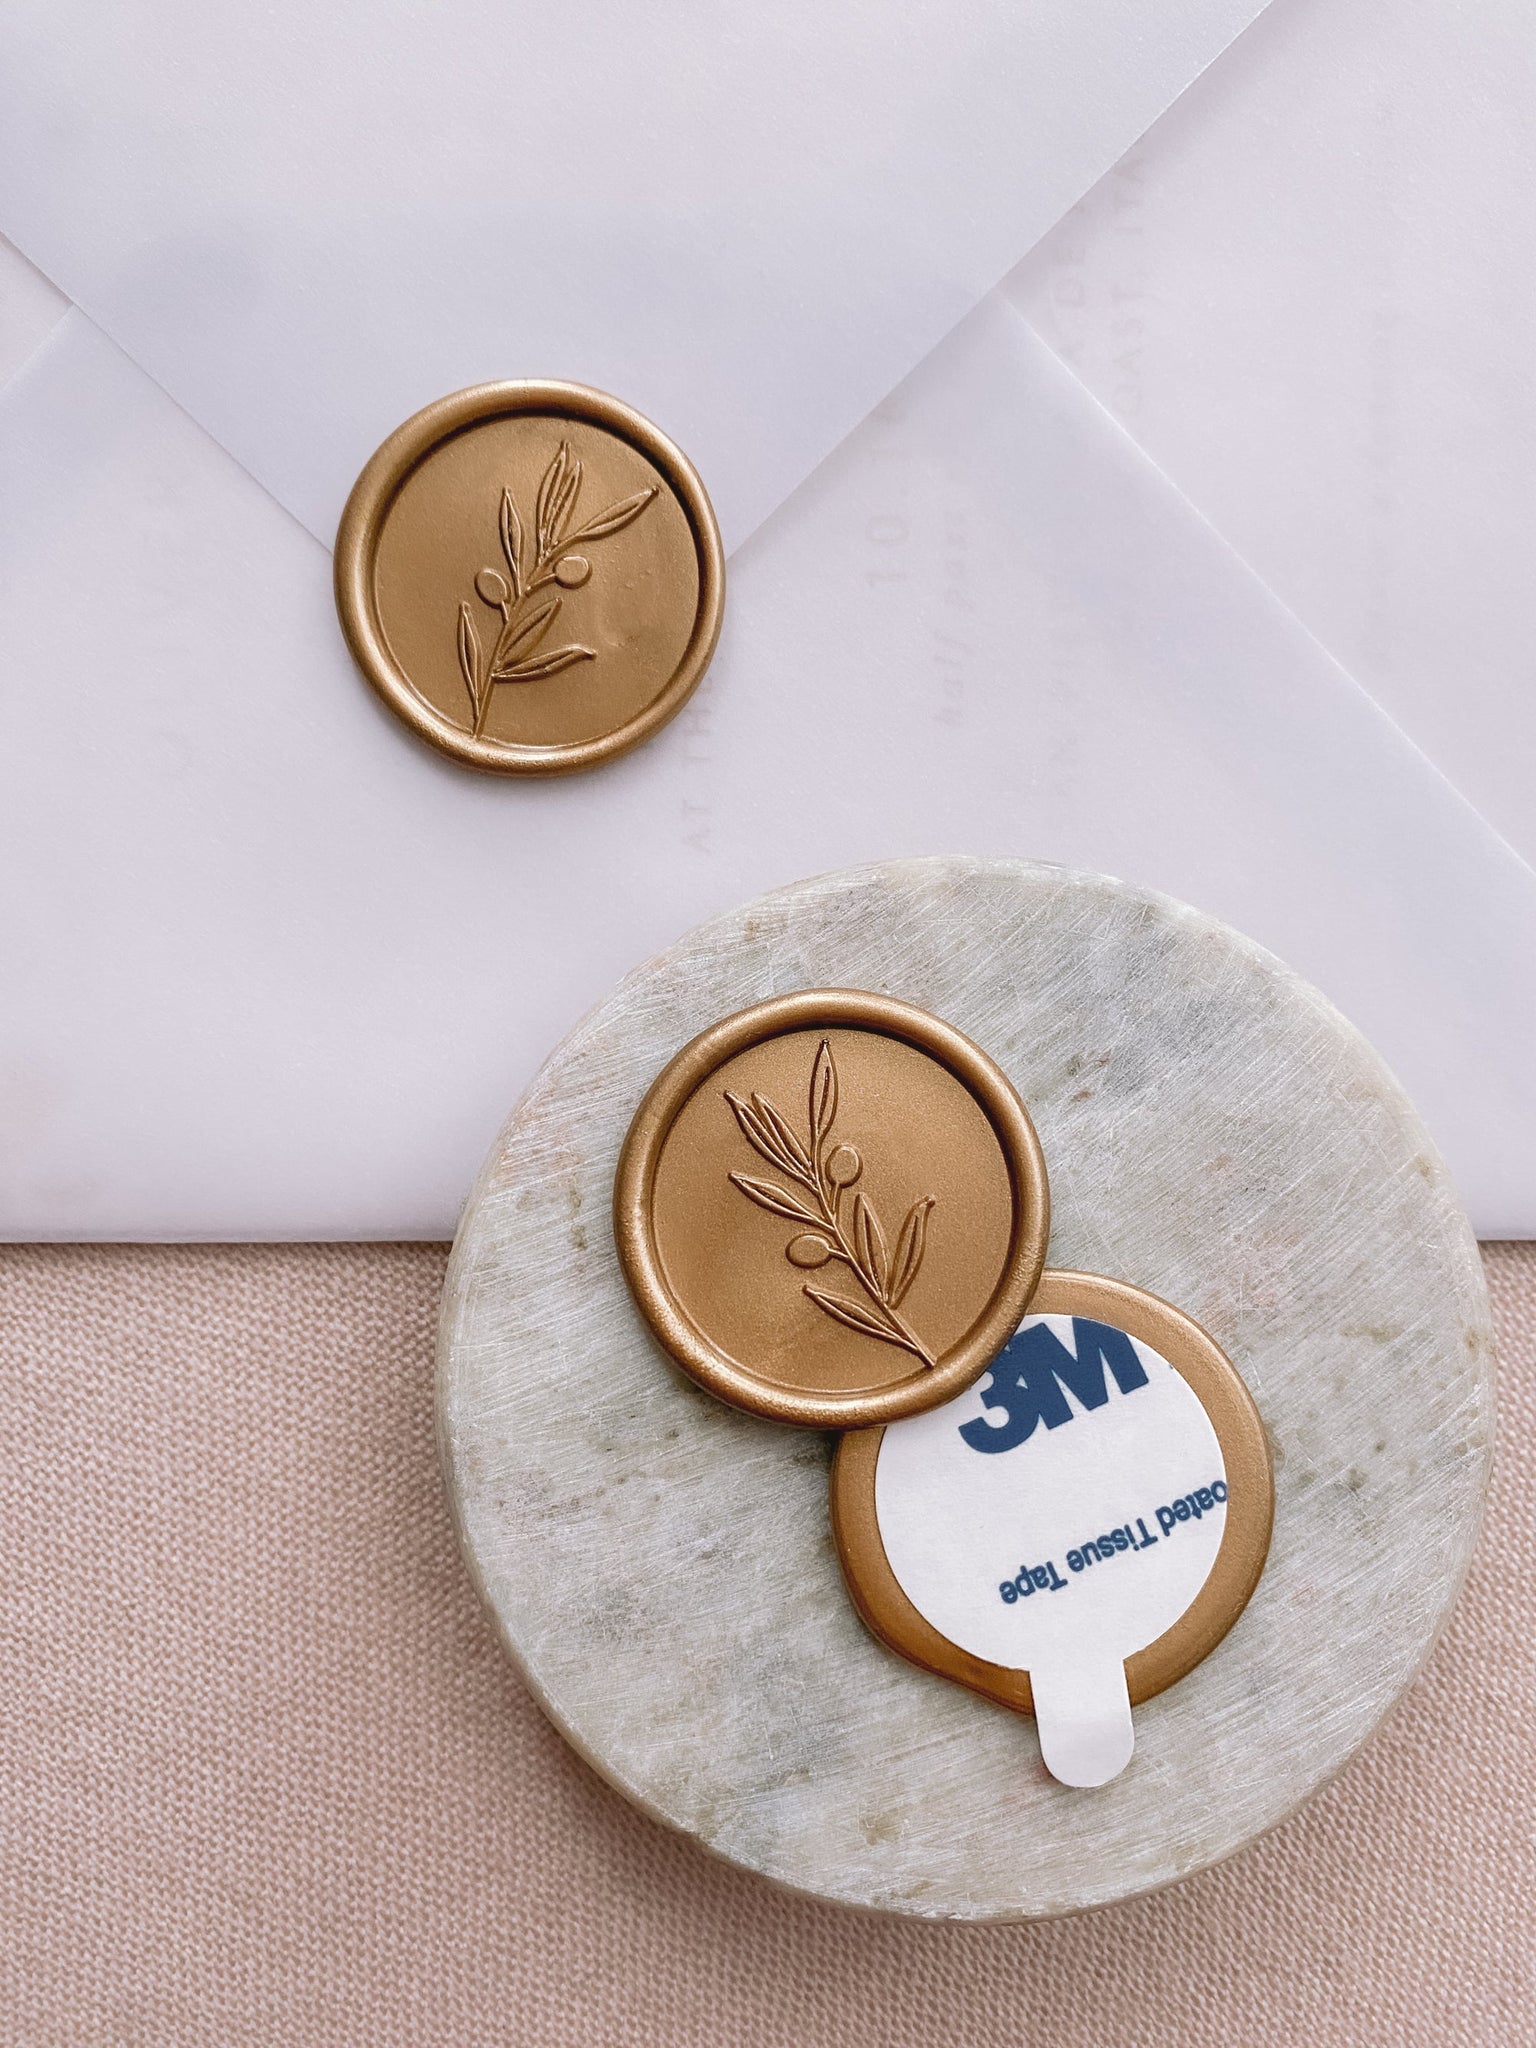 Olive branch wax seal stickers in gold